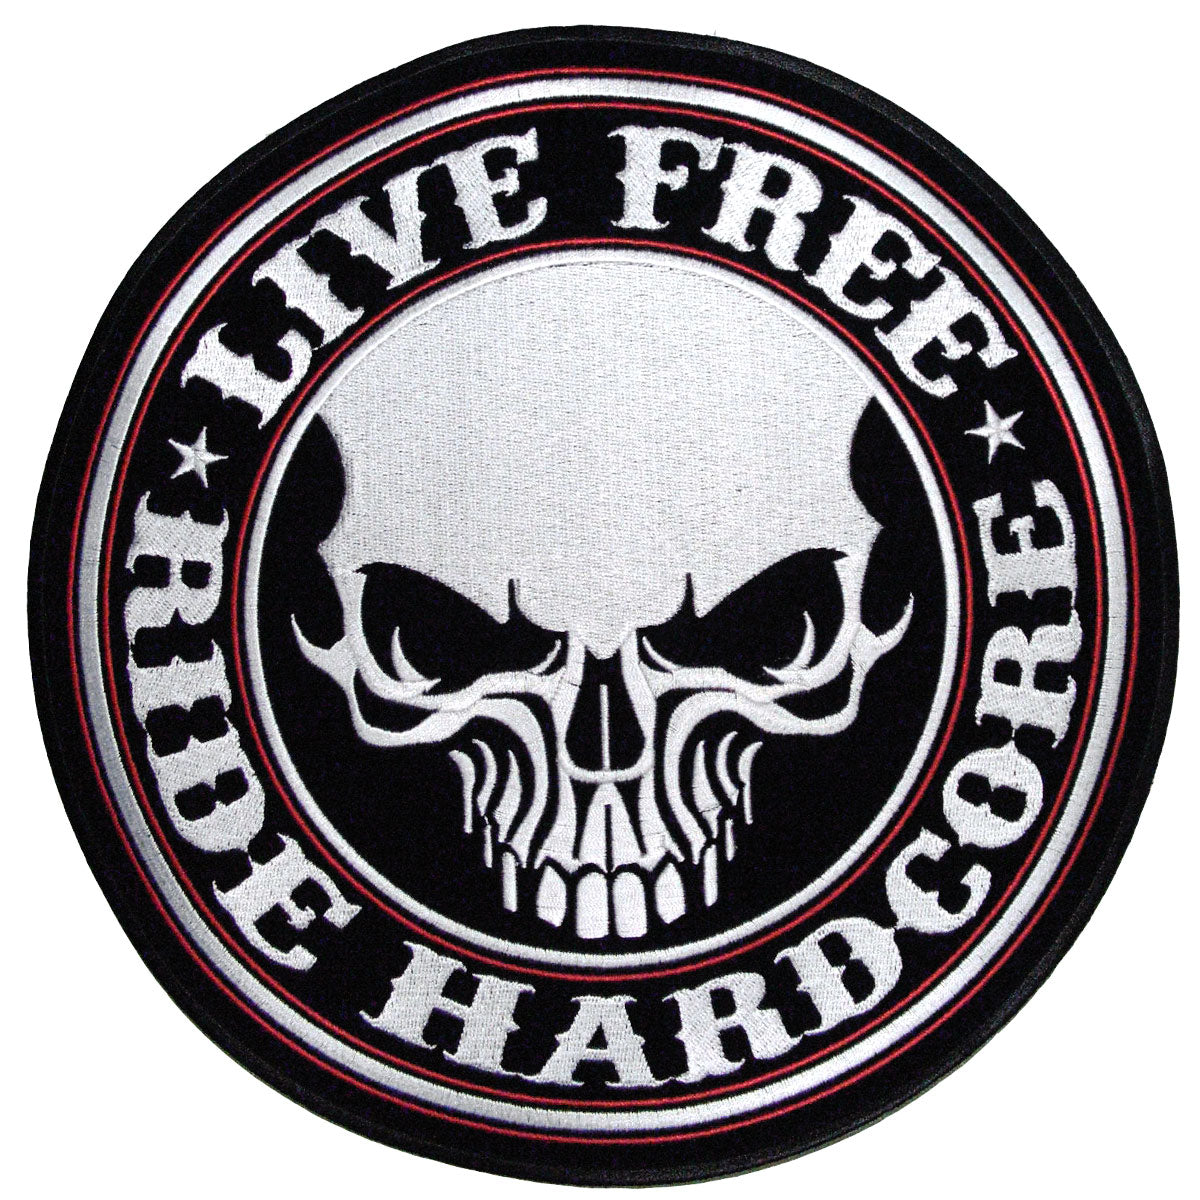 Hot Leathers Live Free Ride Hardcore Skull 10" x 10" Patch